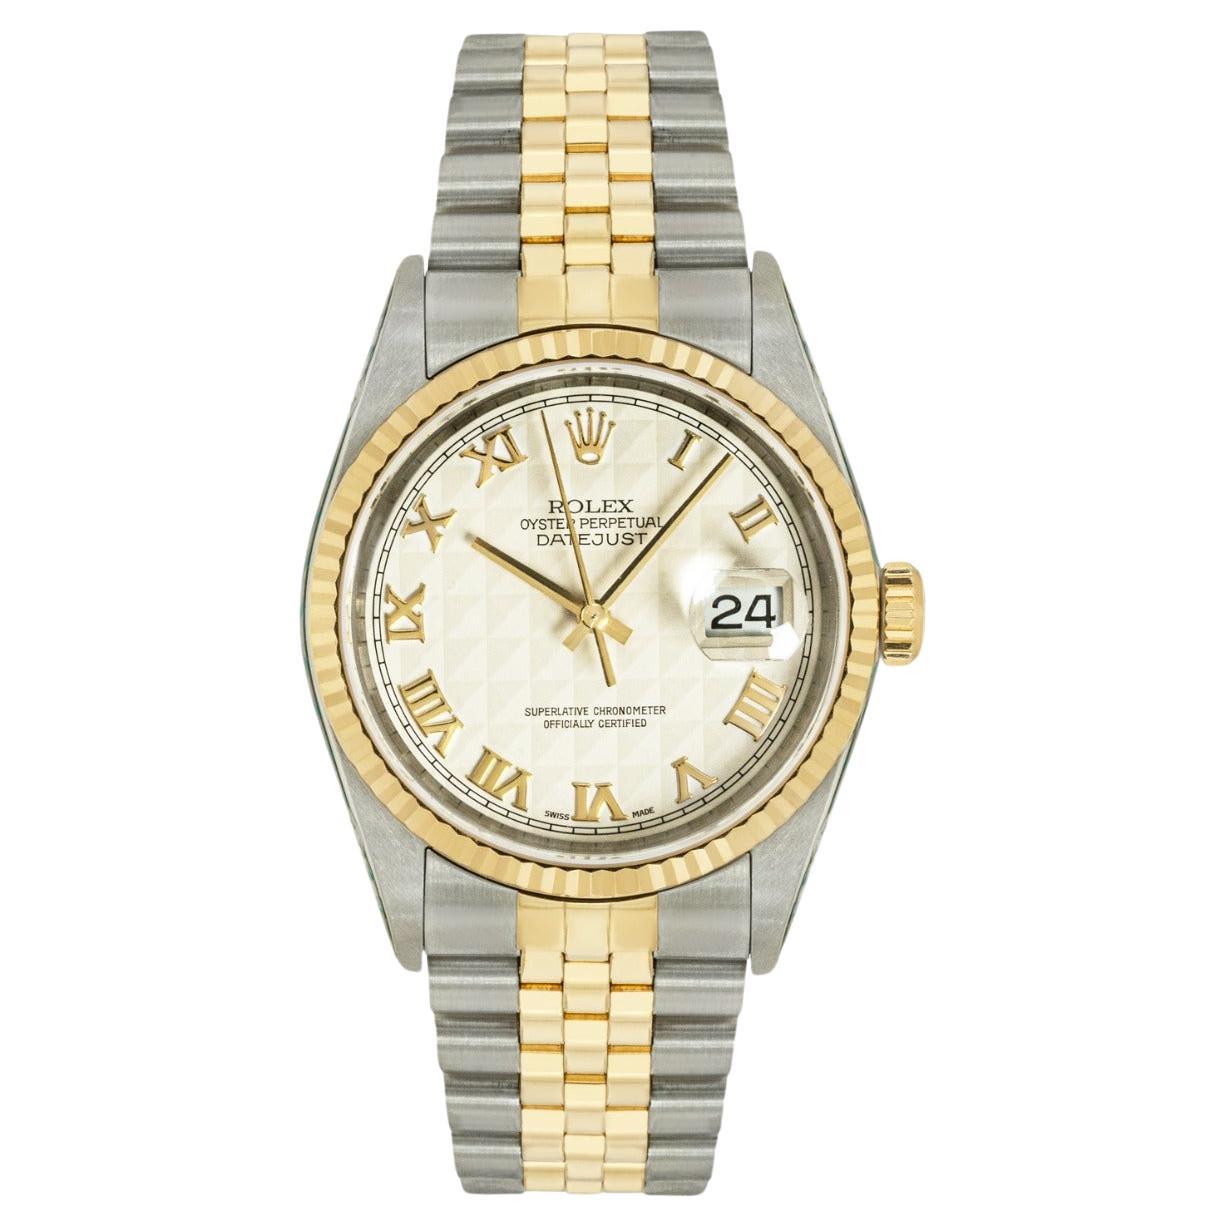 Rolex Datejust Pyramid Dial 16233 For Sale